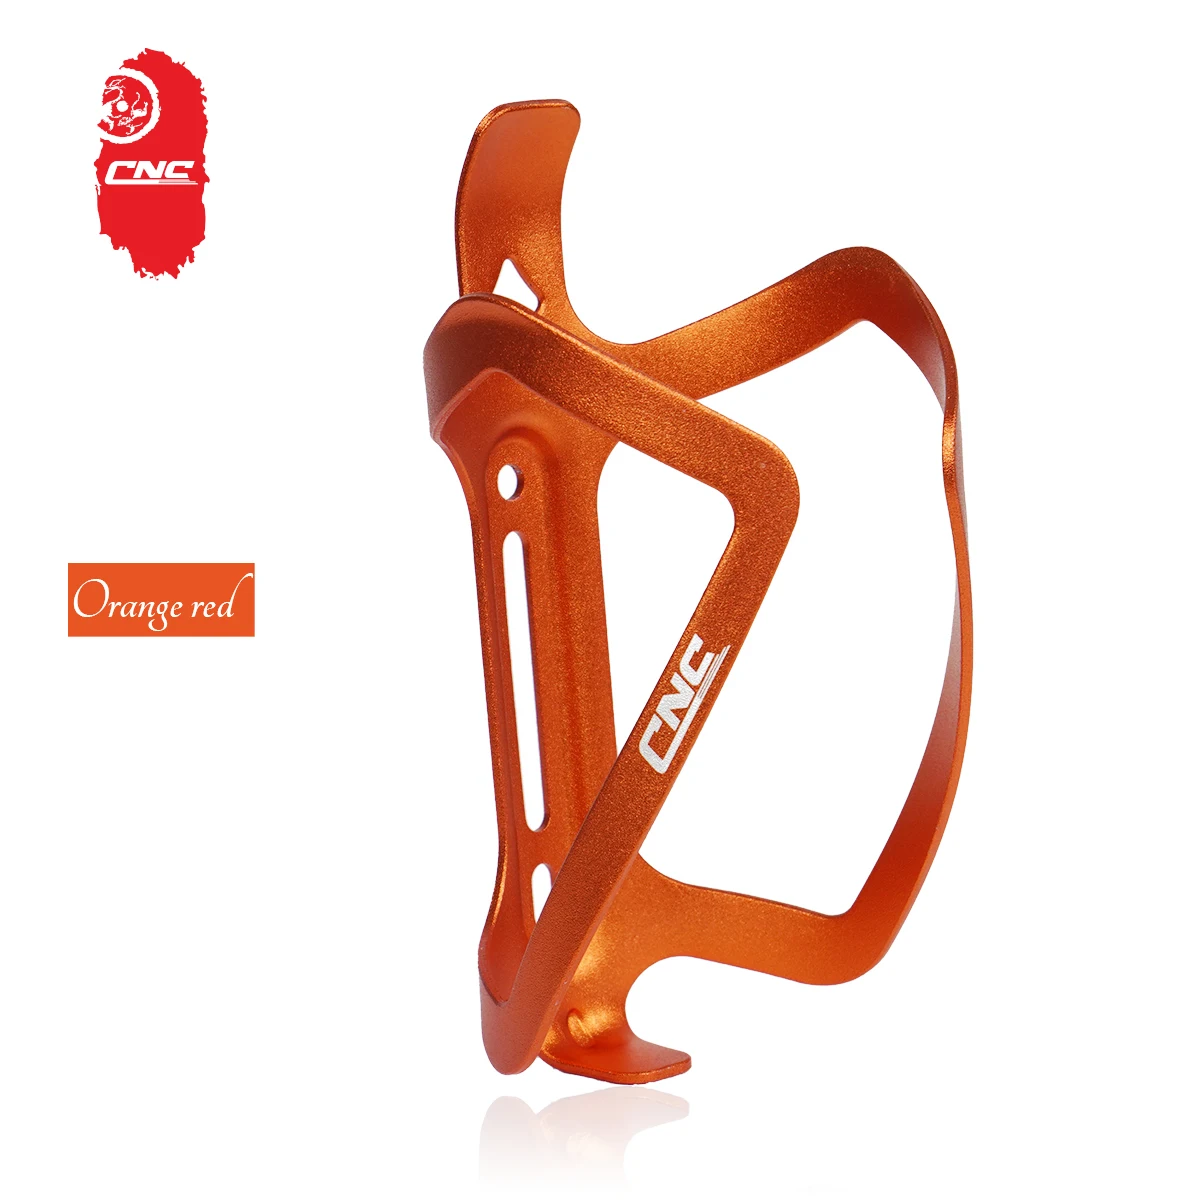 CNC Bicycle Water Bottle Cage, Aluminum alloy Lightweight Road/Mountain Bike Water Bottle Holder,